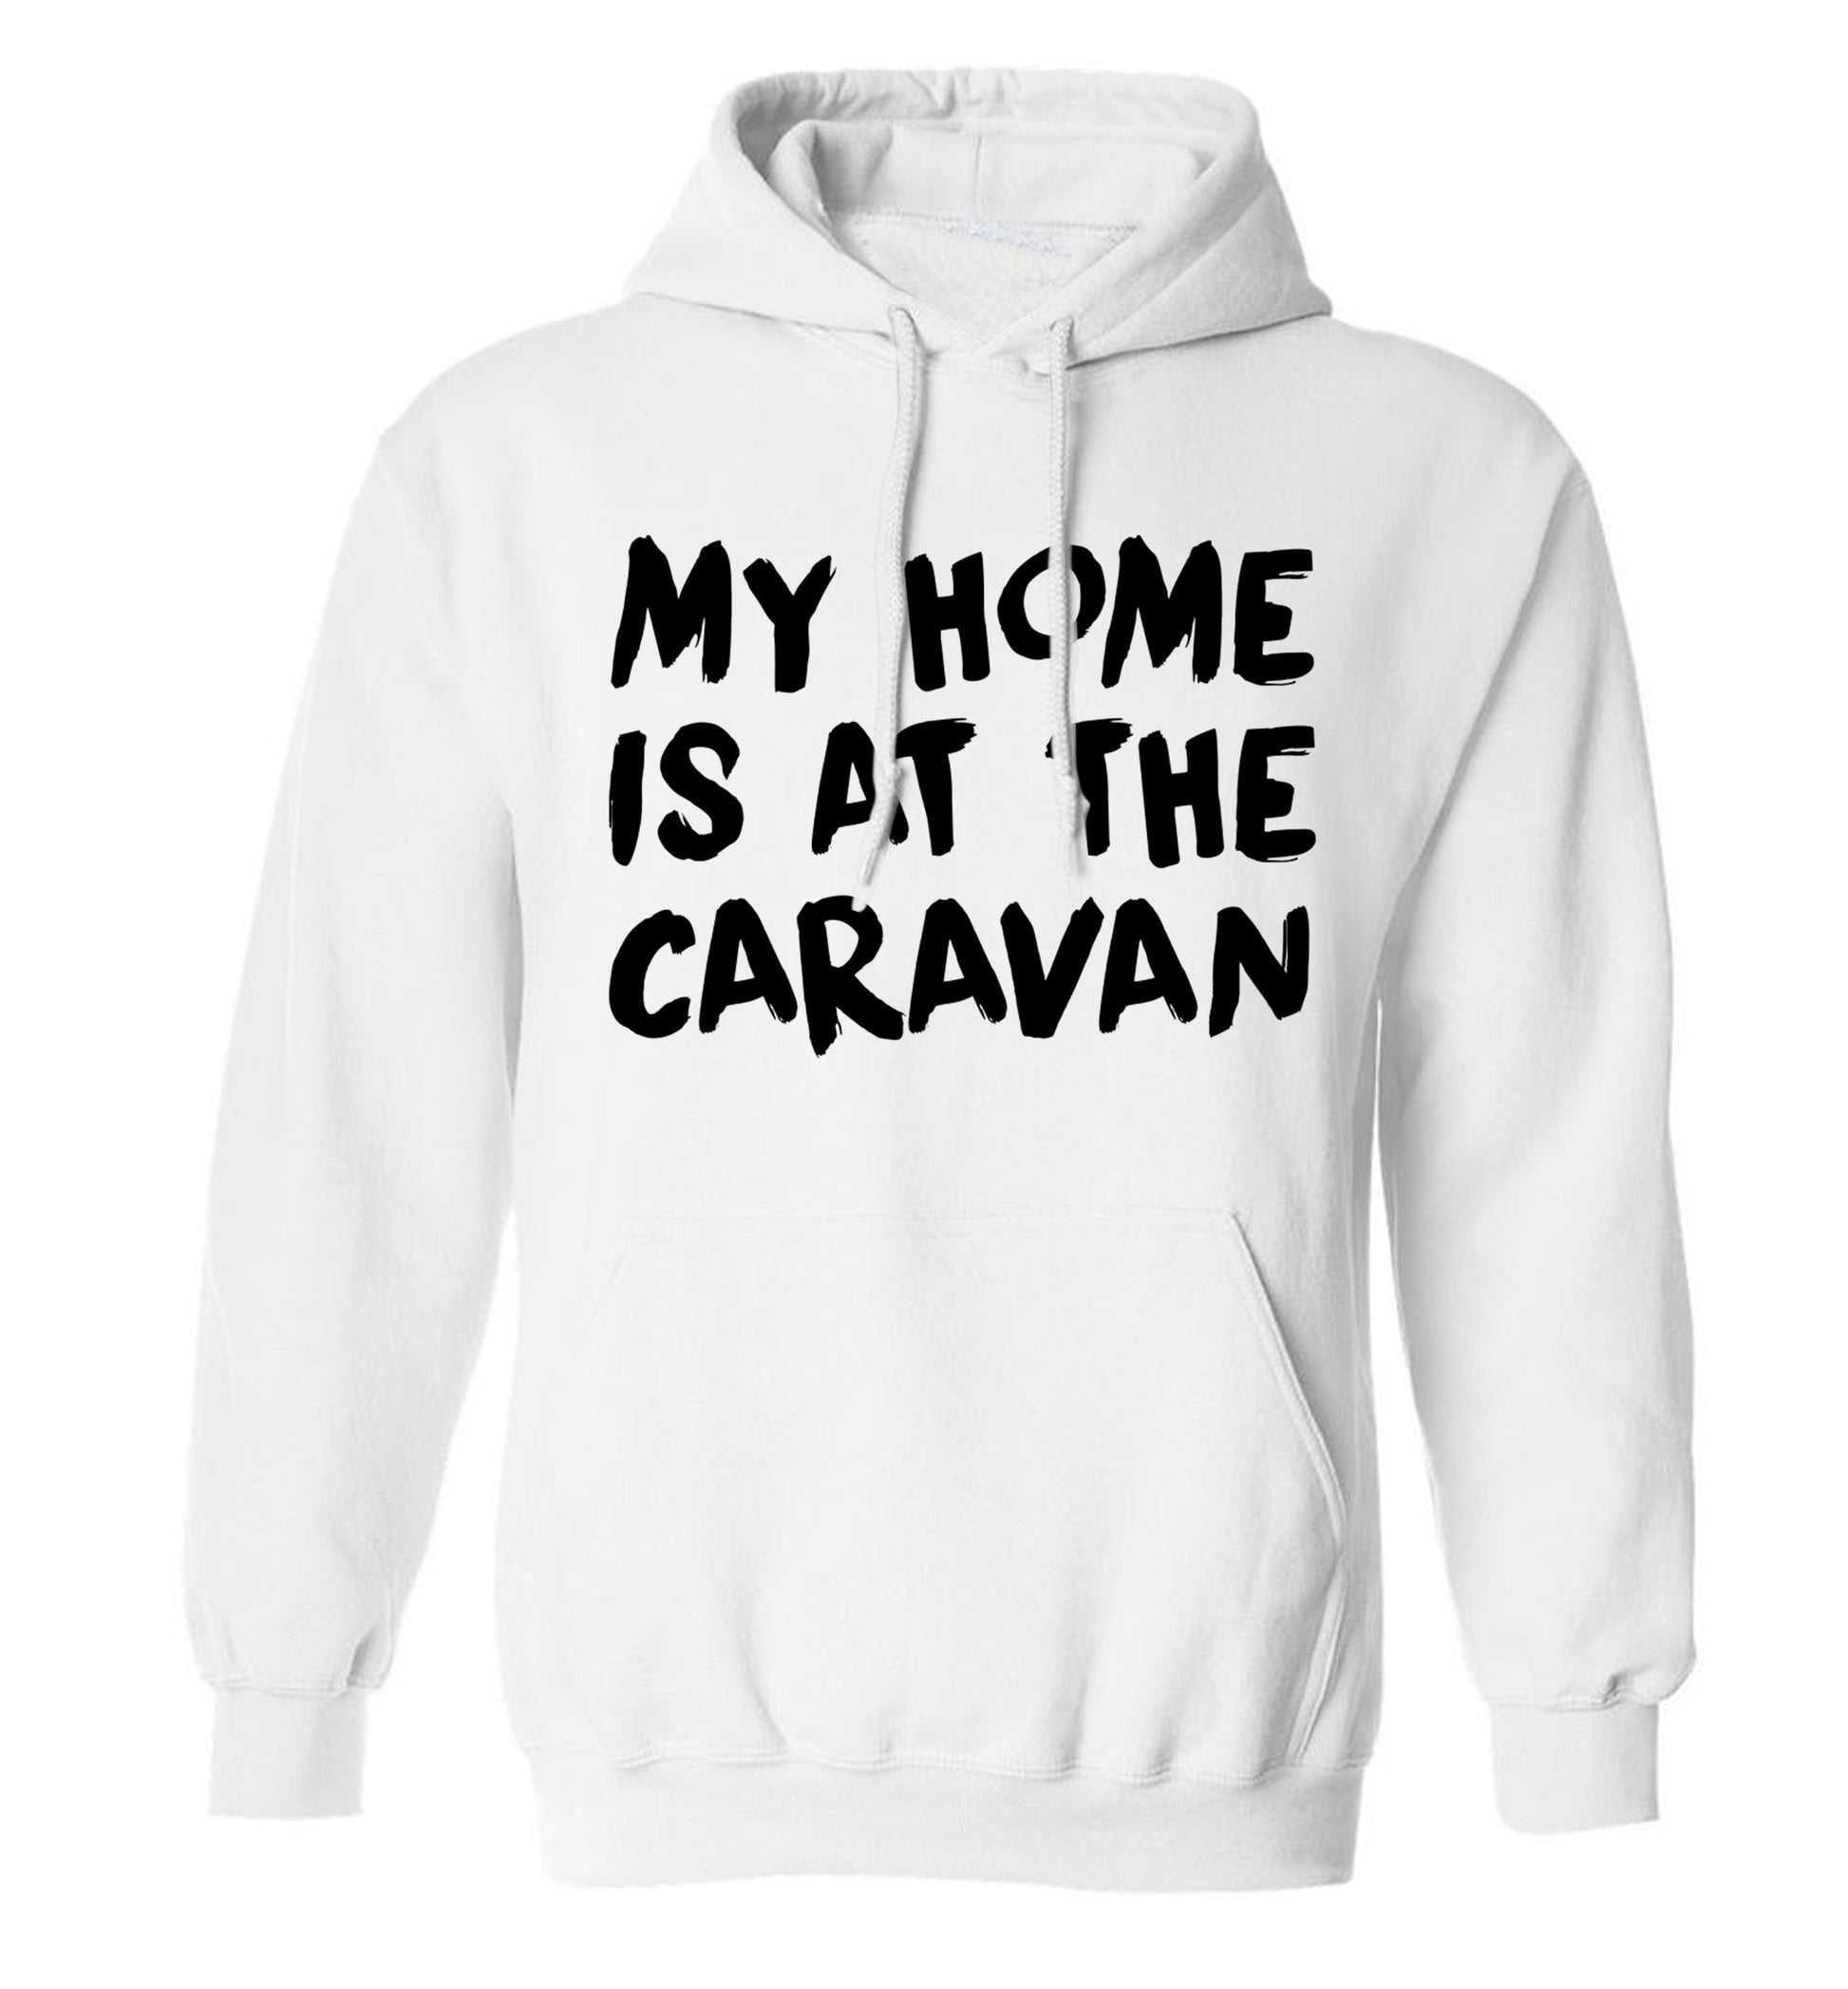 My home is at the caravan adults unisex white hoodie 2XL